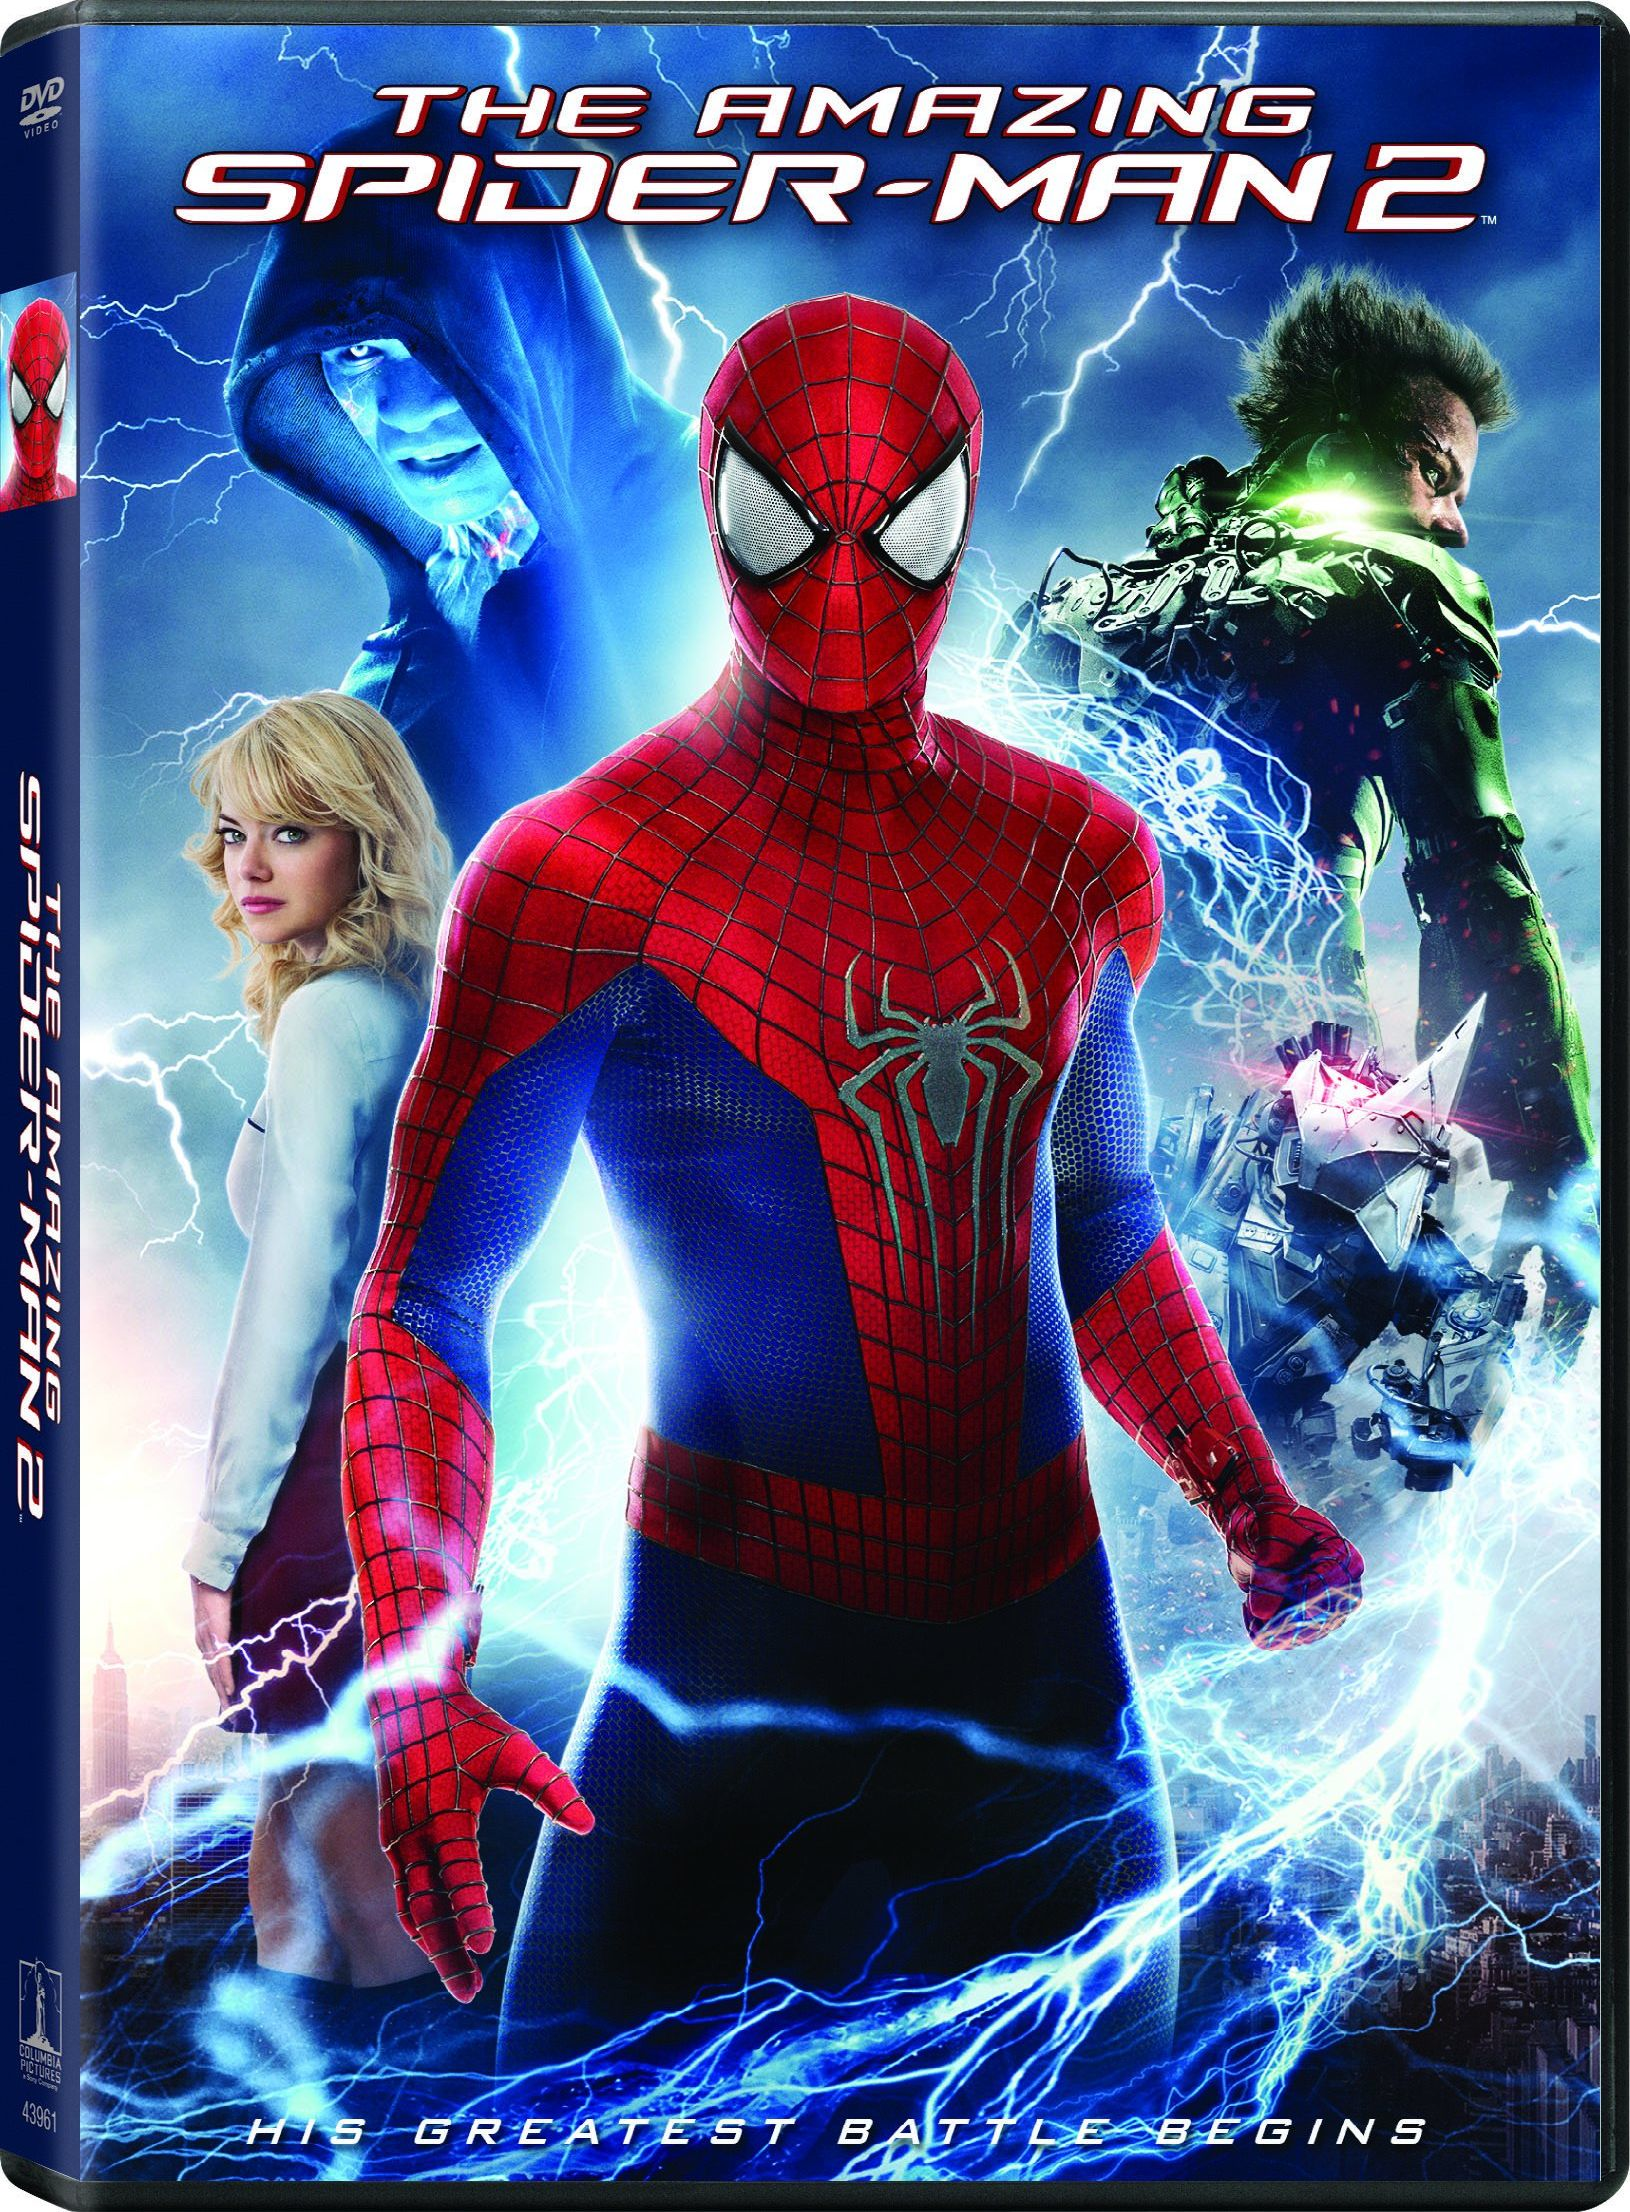 Image The Amazing Spiderman 2 DVD.png Marvel Movies FANDOM